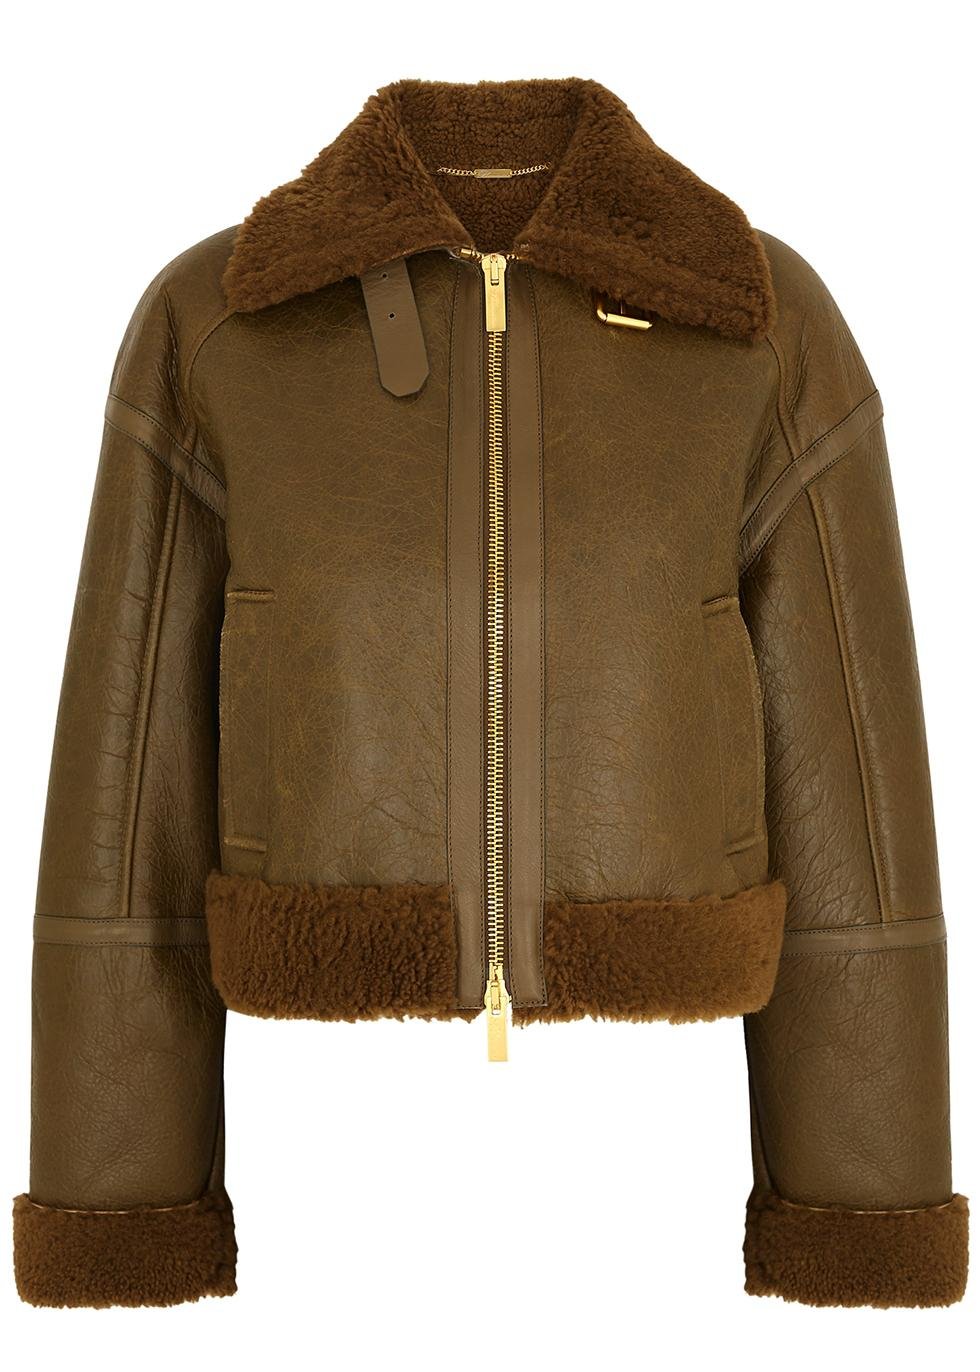 Leather shearling-trimmed jacket by BLUMARINE